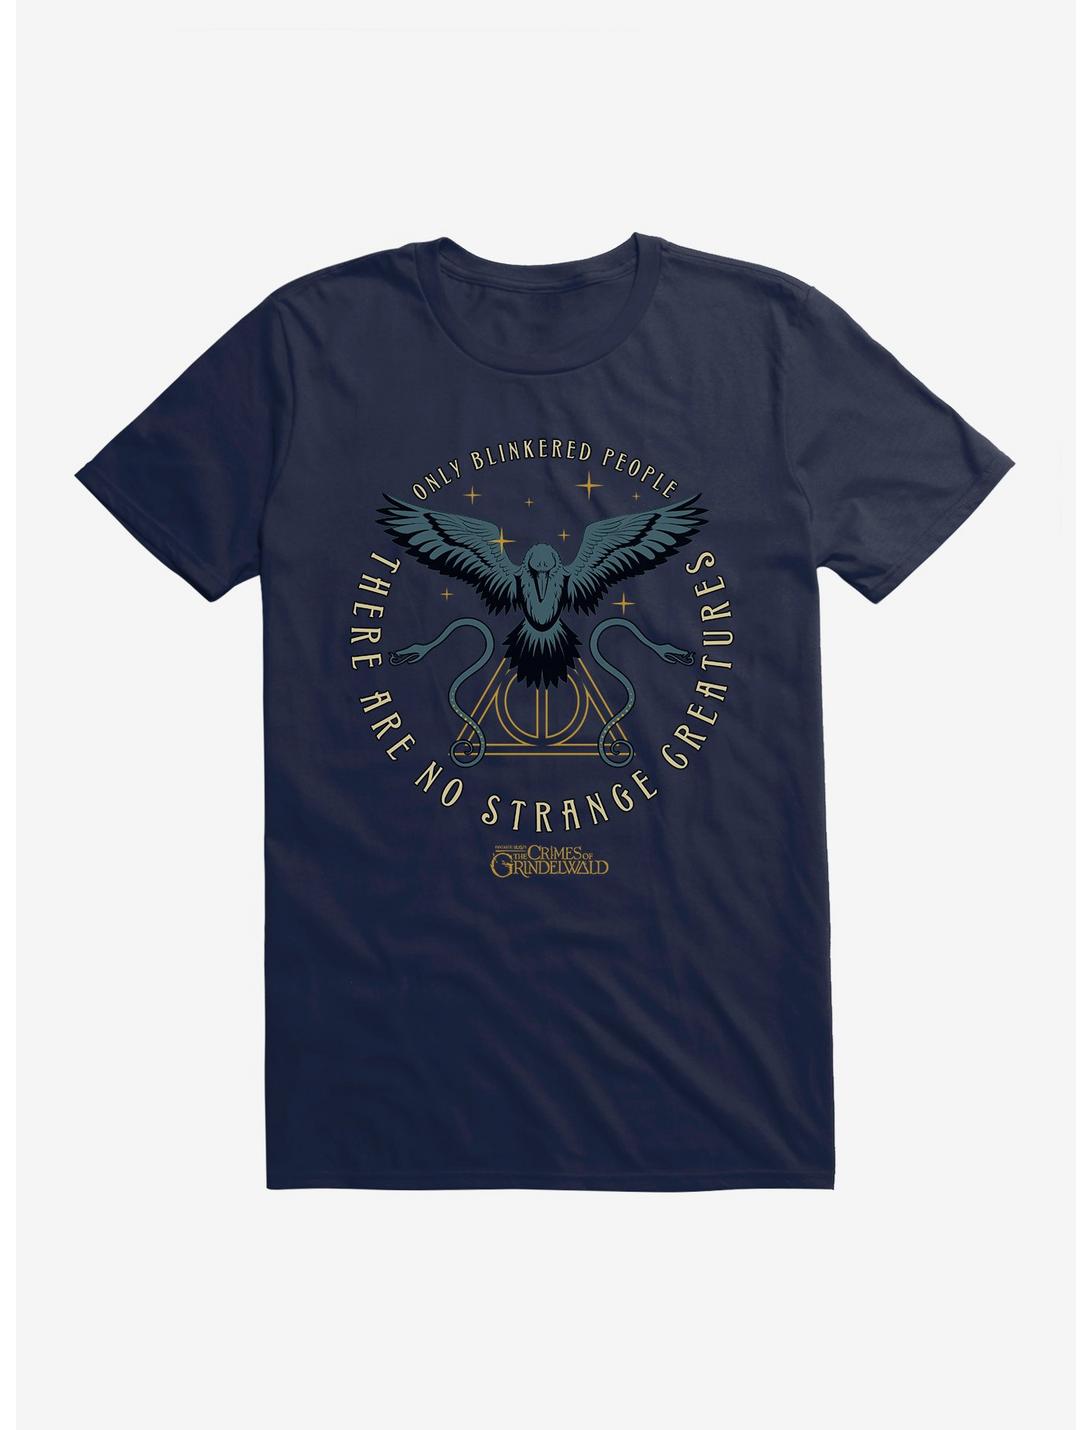 Fantastic Beasts: The Crimes Of Grindelwald Thunderbird T-Shirt, MIDNIGHT NAVY, hi-res